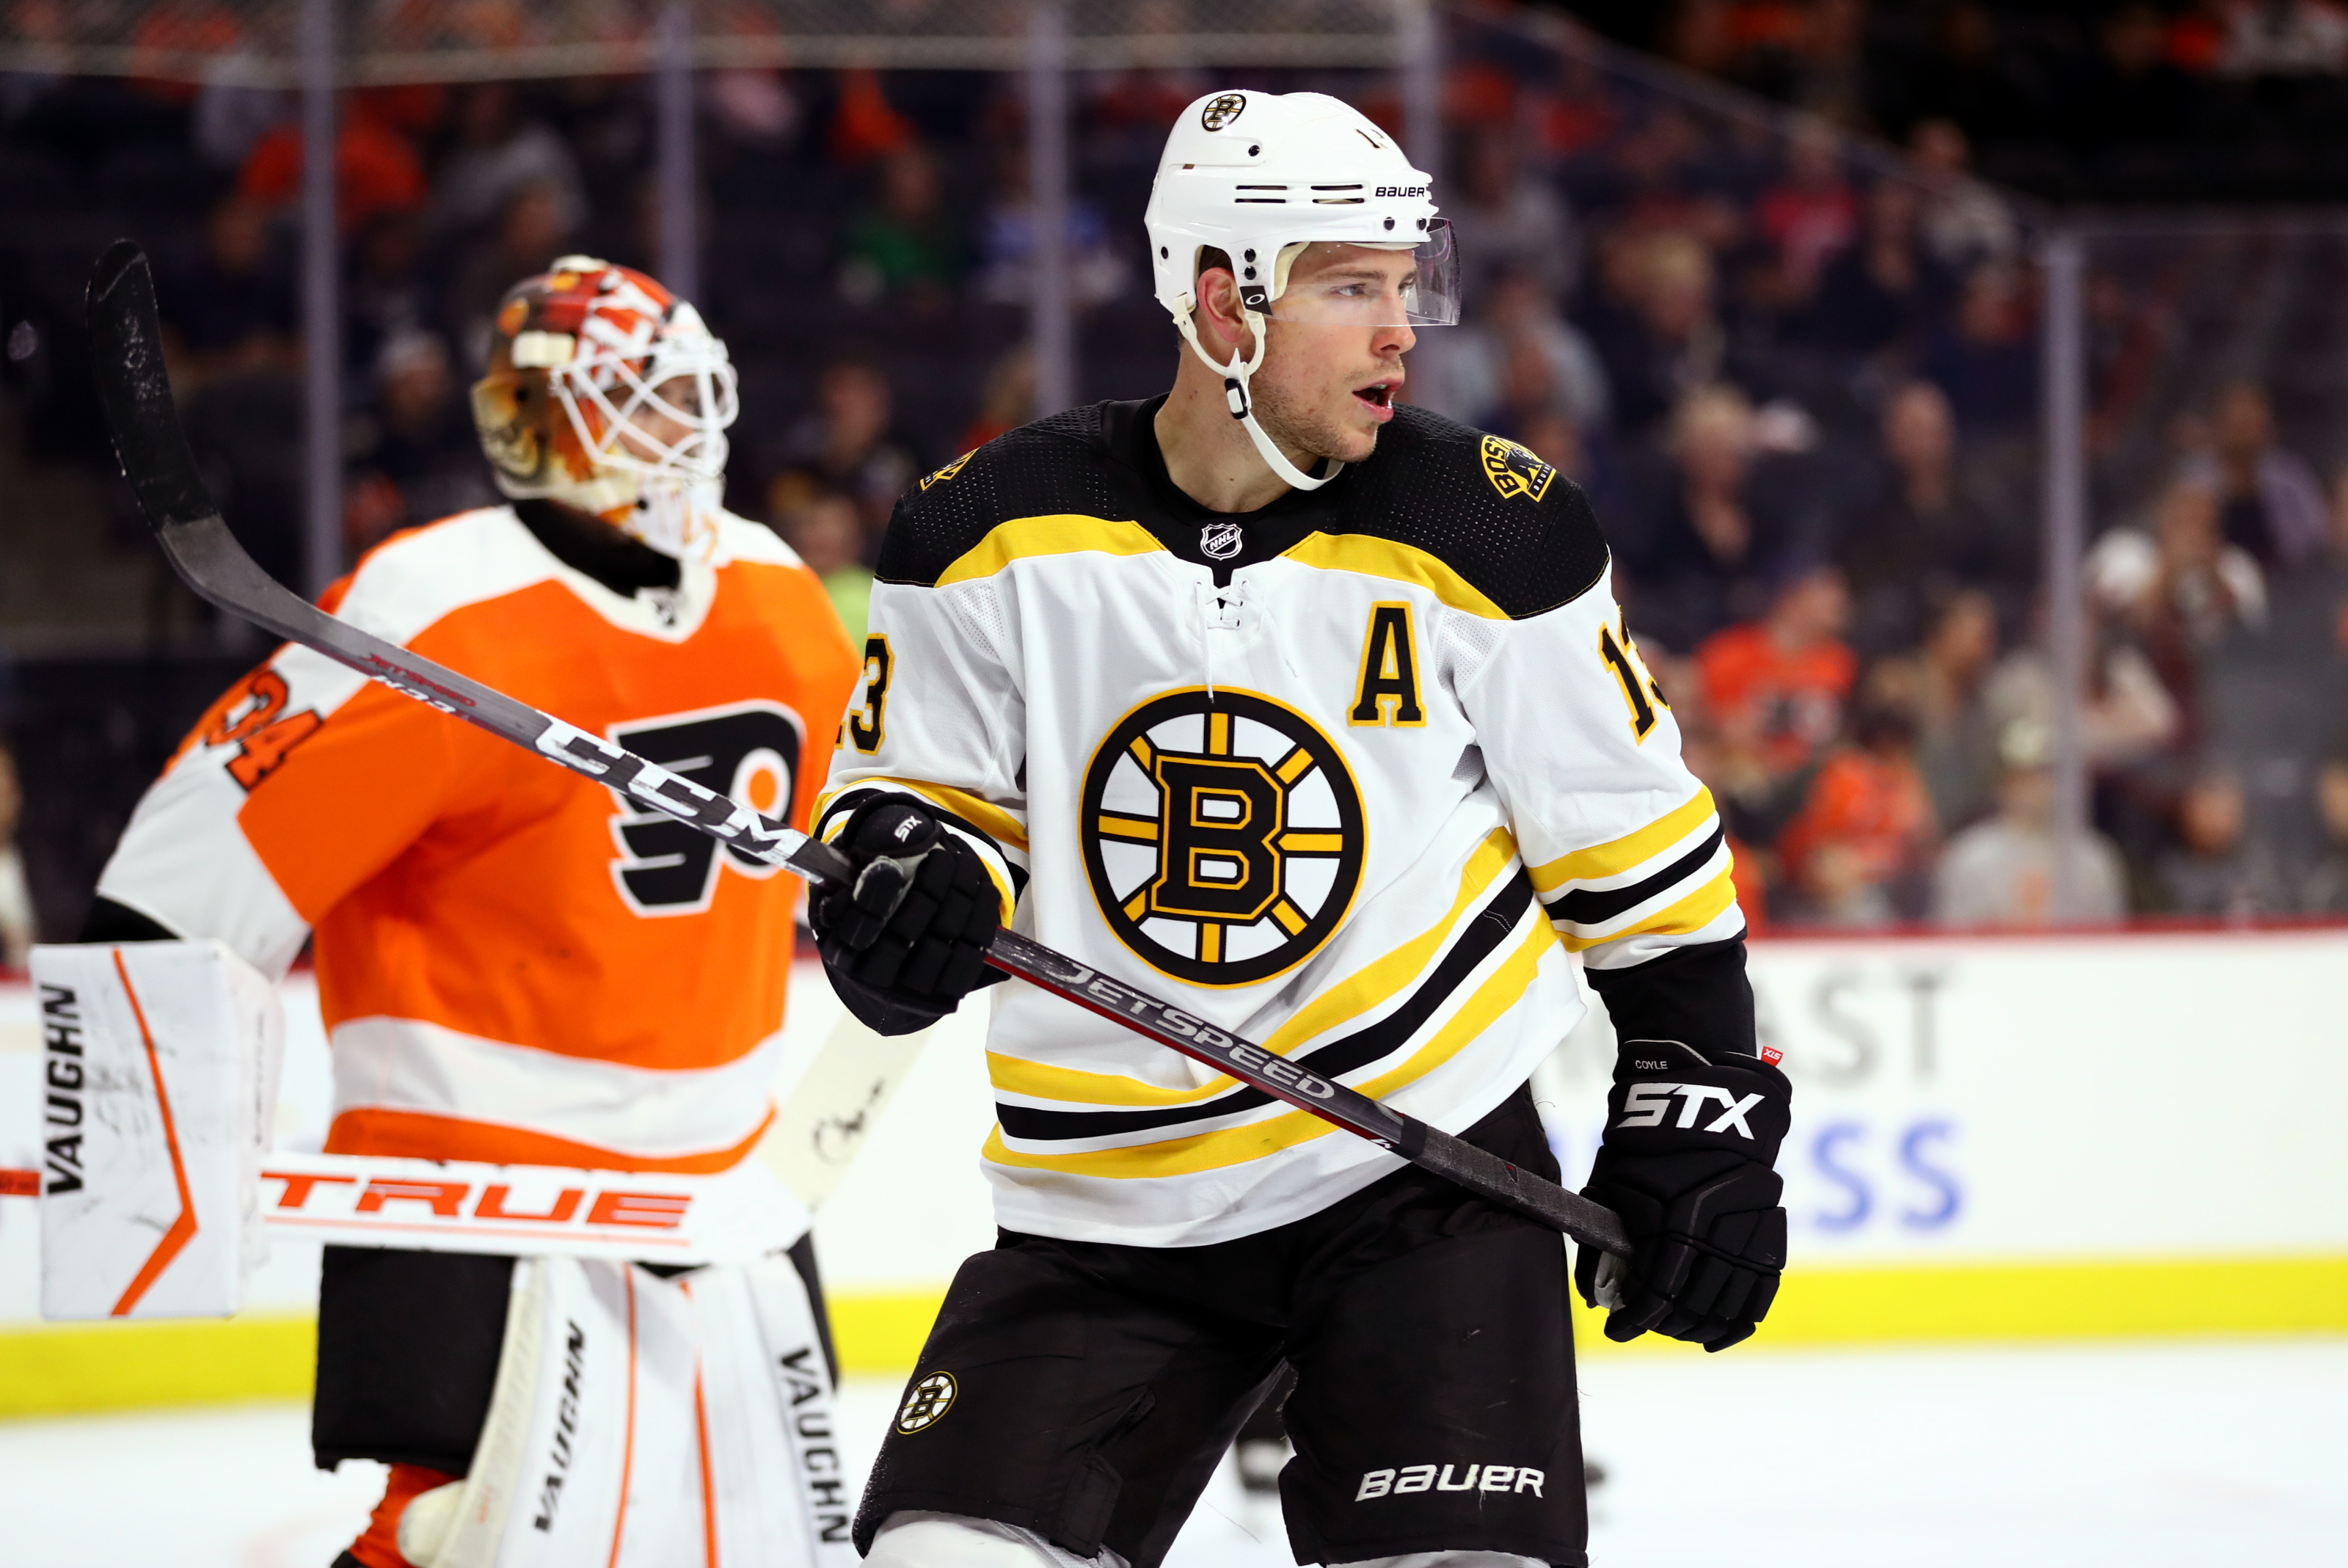 Charlie Coyle plays the hero for Bruins in Game 1 